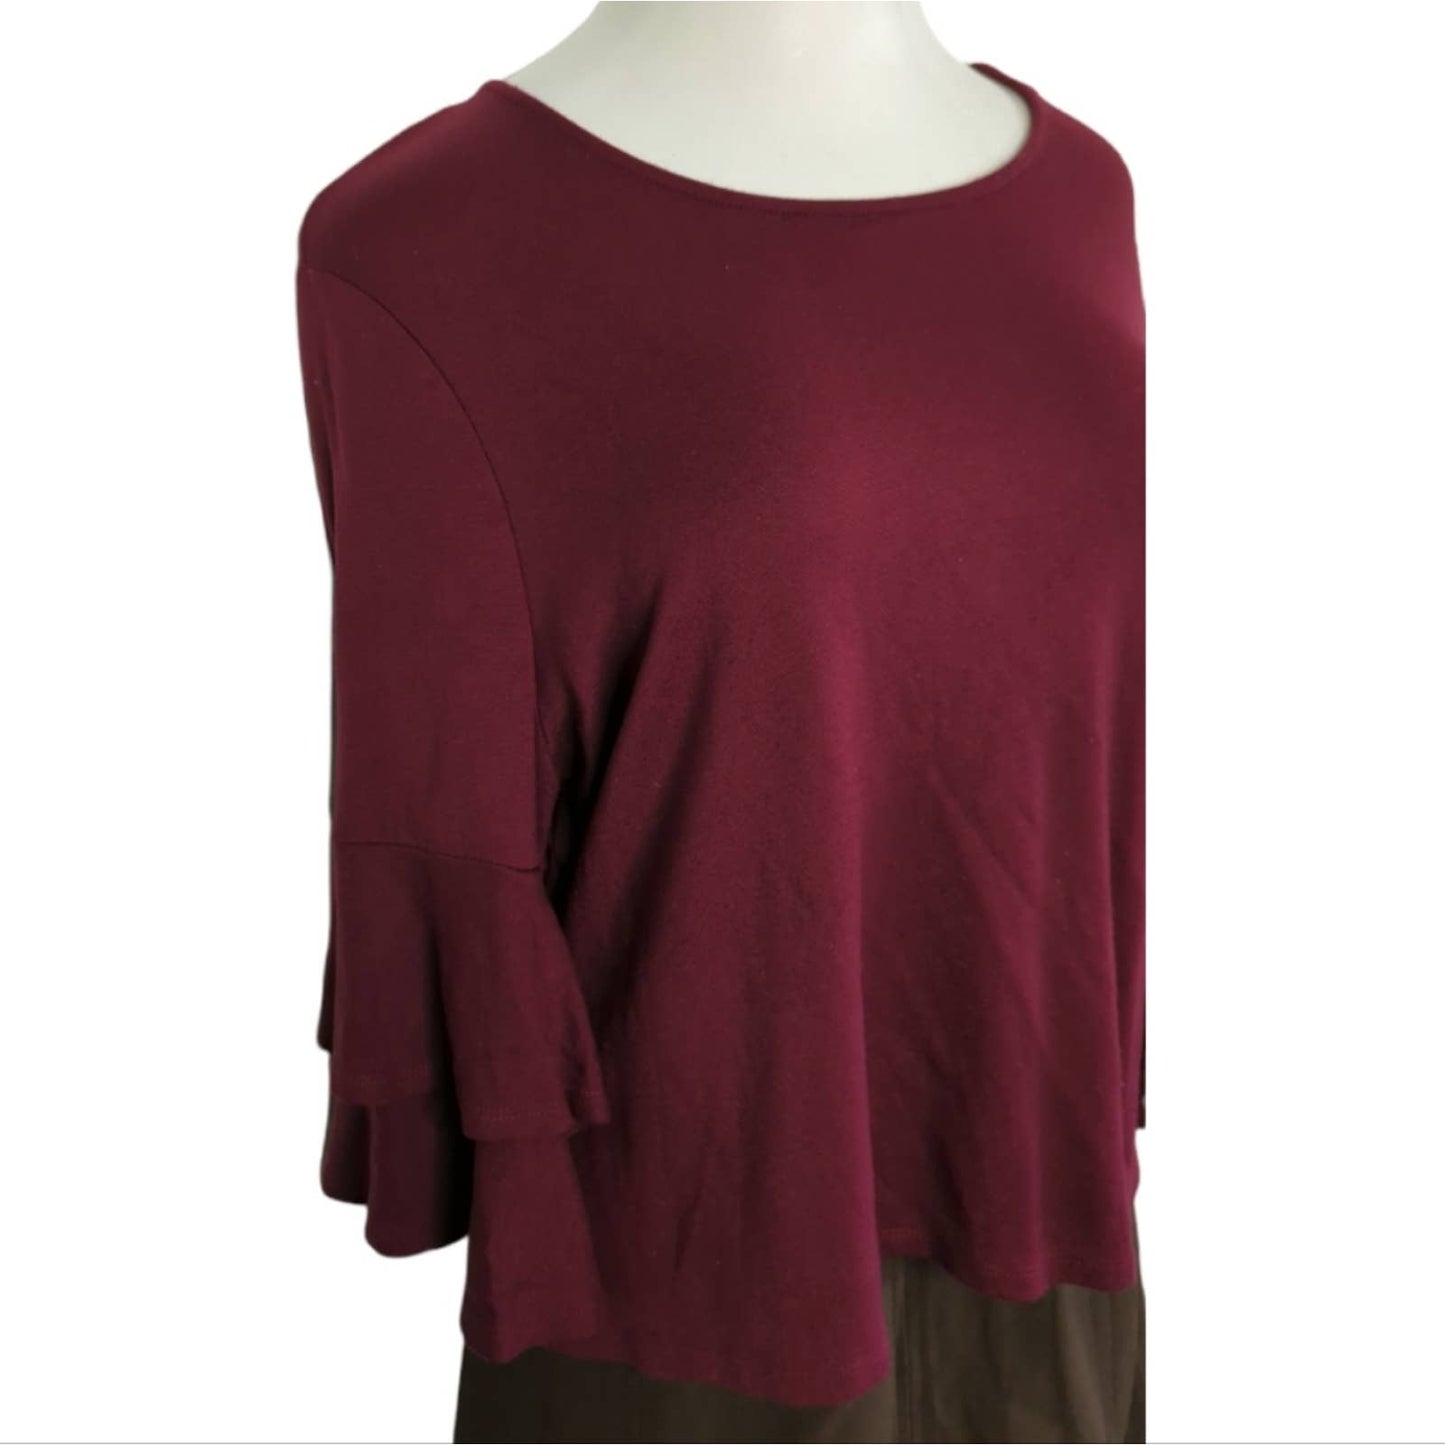 ANTHROPOLOGIE W5 Burgundy Heavy Knit Career Top with 3/4 Ruffle Sleeves XL